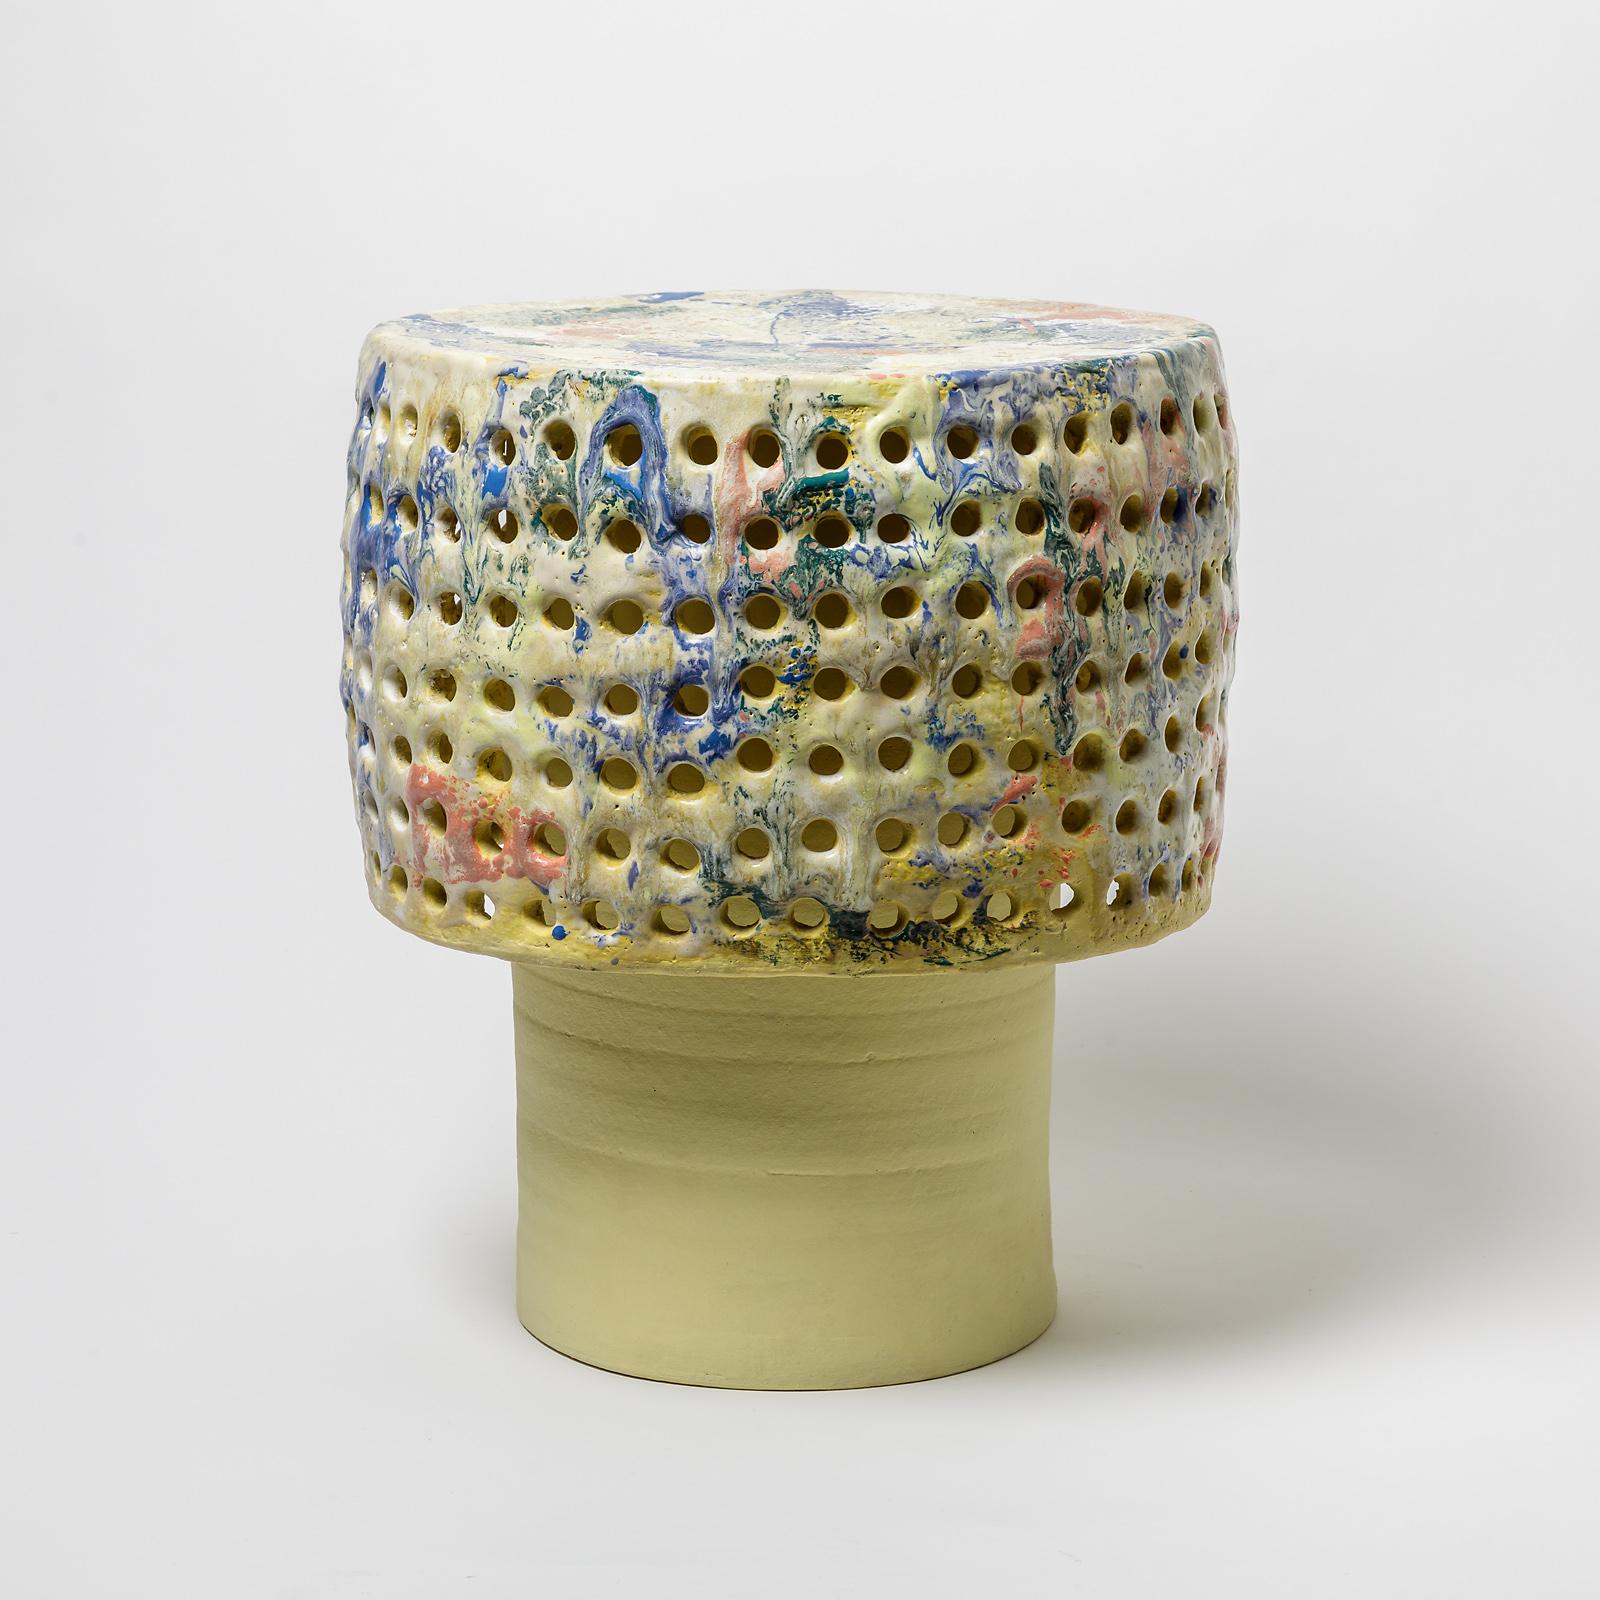 A ceramic stool or table with glazes decoration by Mia Jensen.
Unique piece.
Signed under the base.
Circa 2021.